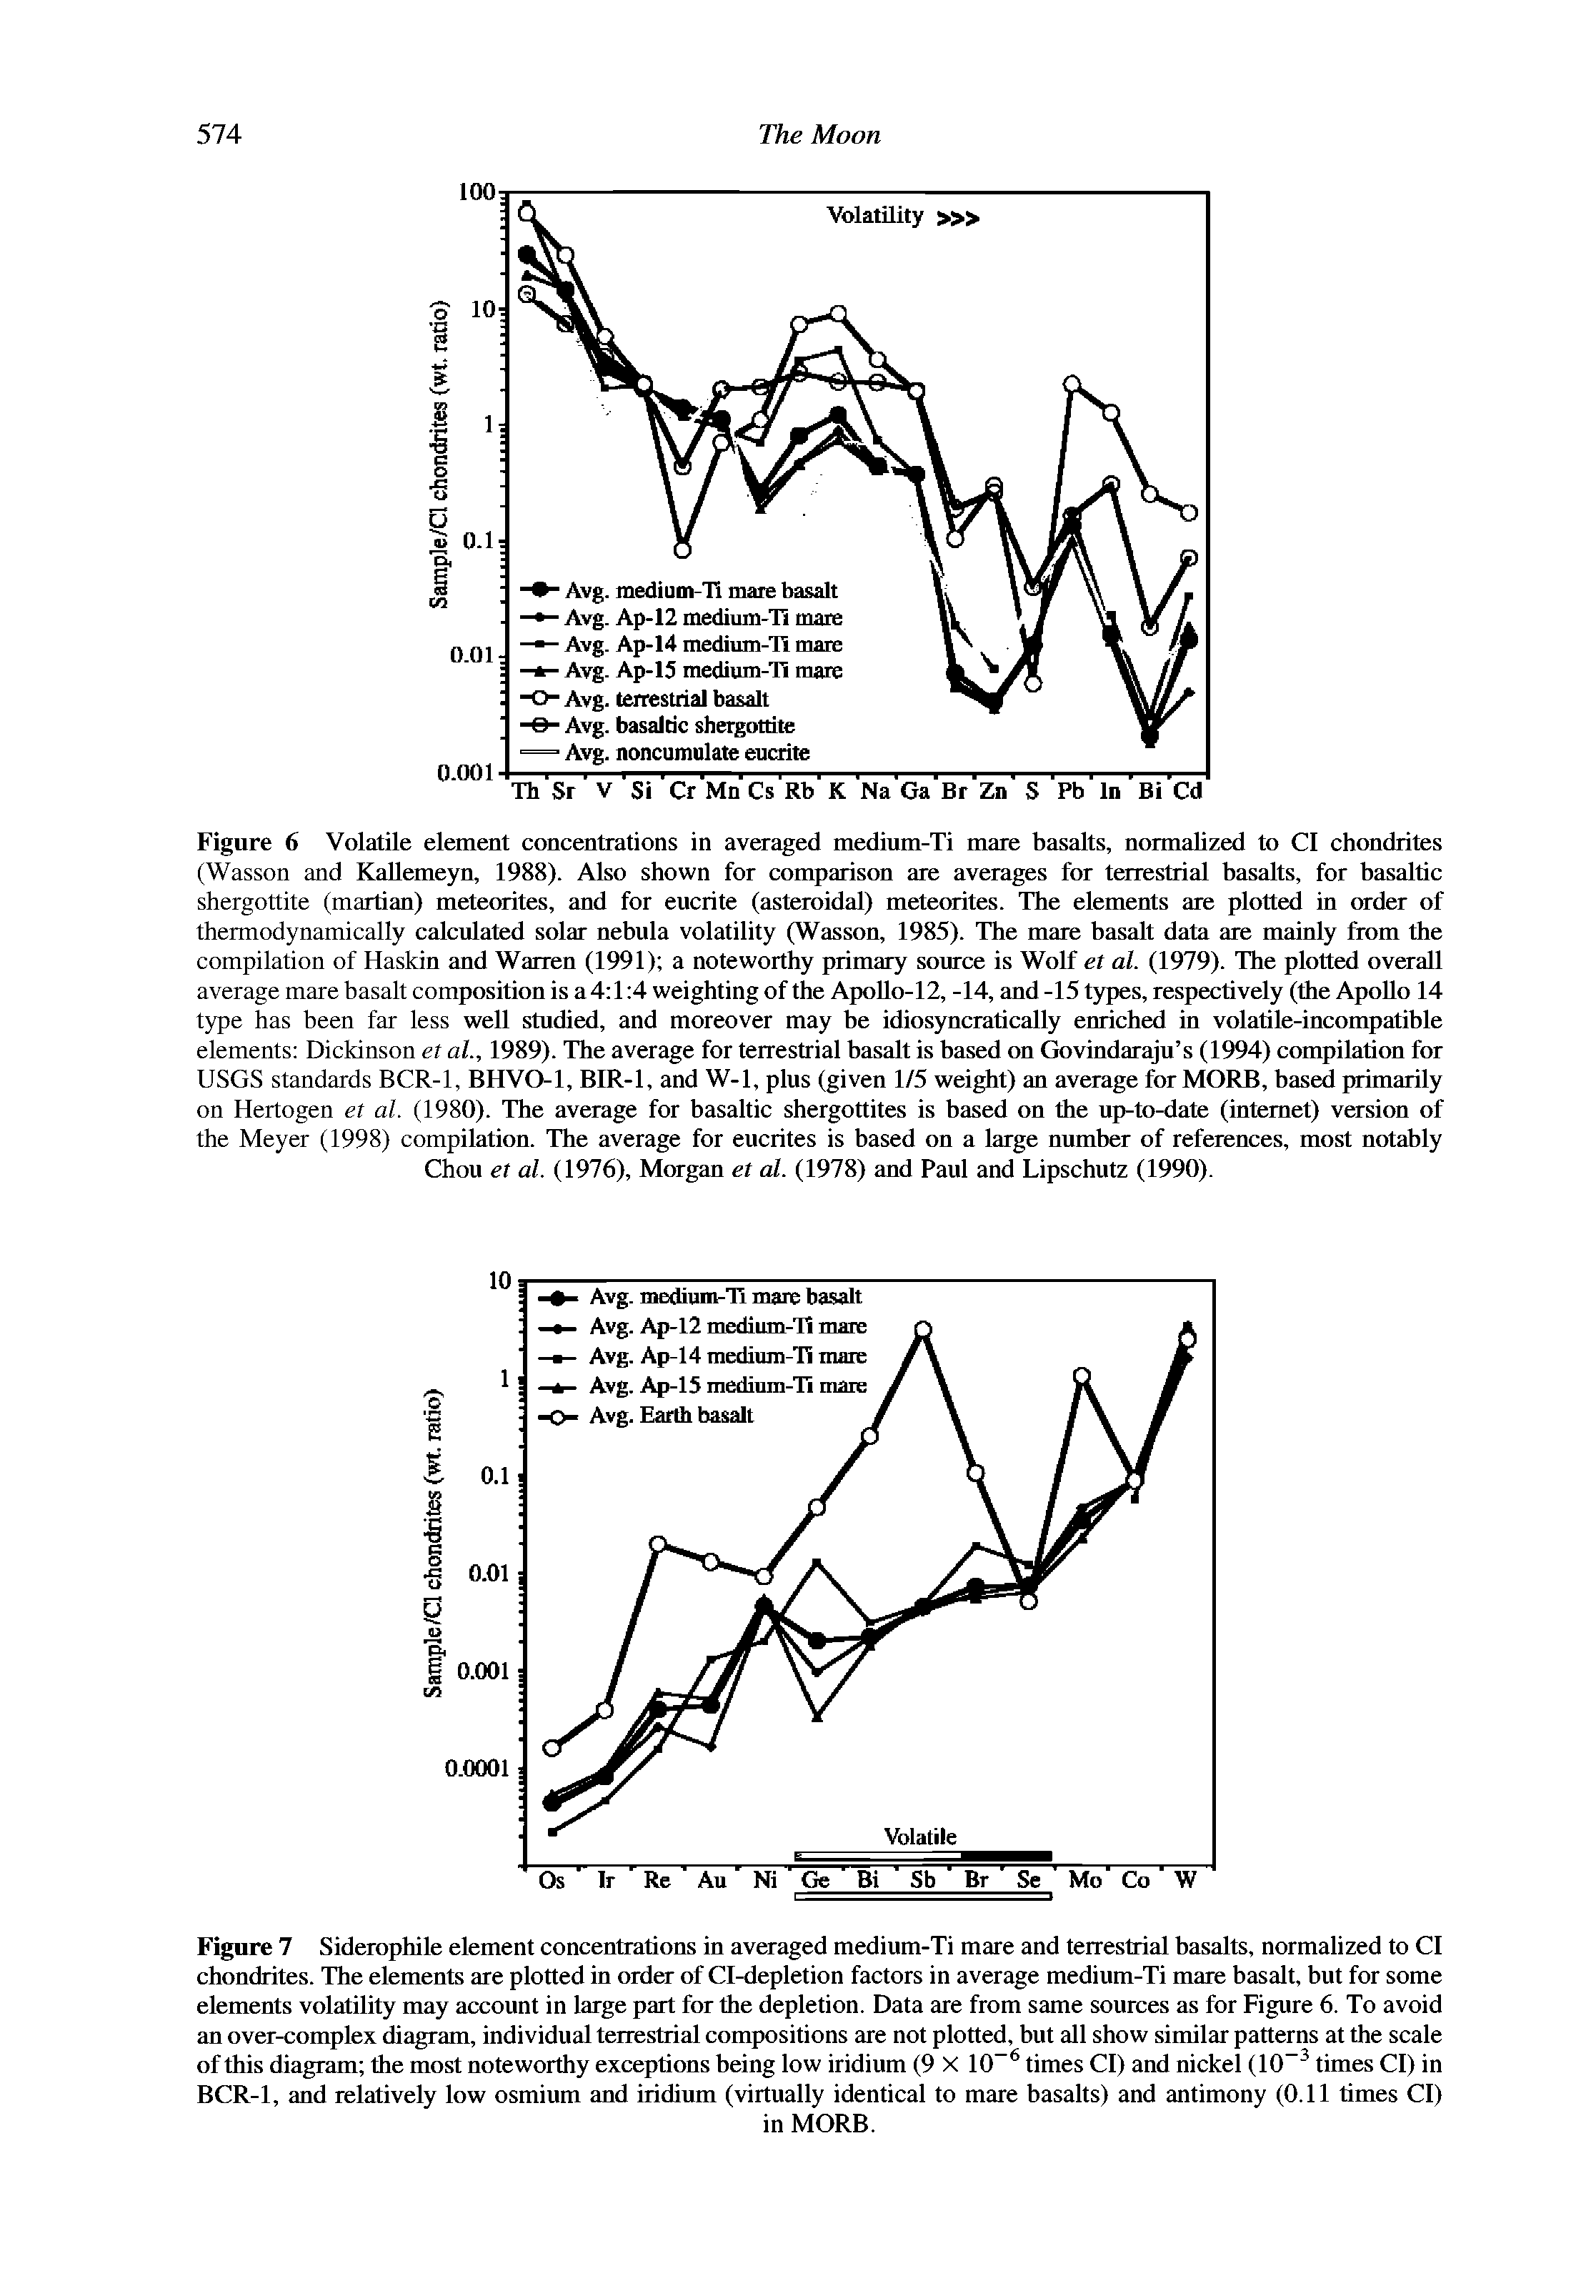 Figure 7 Siderophile element concentrations in averaged medium-Ti mare and terrestrial basalts, normalized to Cl chondrites. The elements are plotted in order of Cl-depletion factors in average medium-Ti mare basalt, but for some elements volatility may account in large part for the depletion. Data are from same sources as for Figure 6. To avoid an over-complex diagram, individual terrestrial compositions are not plotted, but all show similar patterns at the scale of this diagram the most noteworthy exceptions being low iridium (9 X 10 times Cl) and nickel (10 times Cl) in BCR-1, and relatively low osmium and iridium (virtually identical to mare basalts) and antimony (0.11 times Cl)...